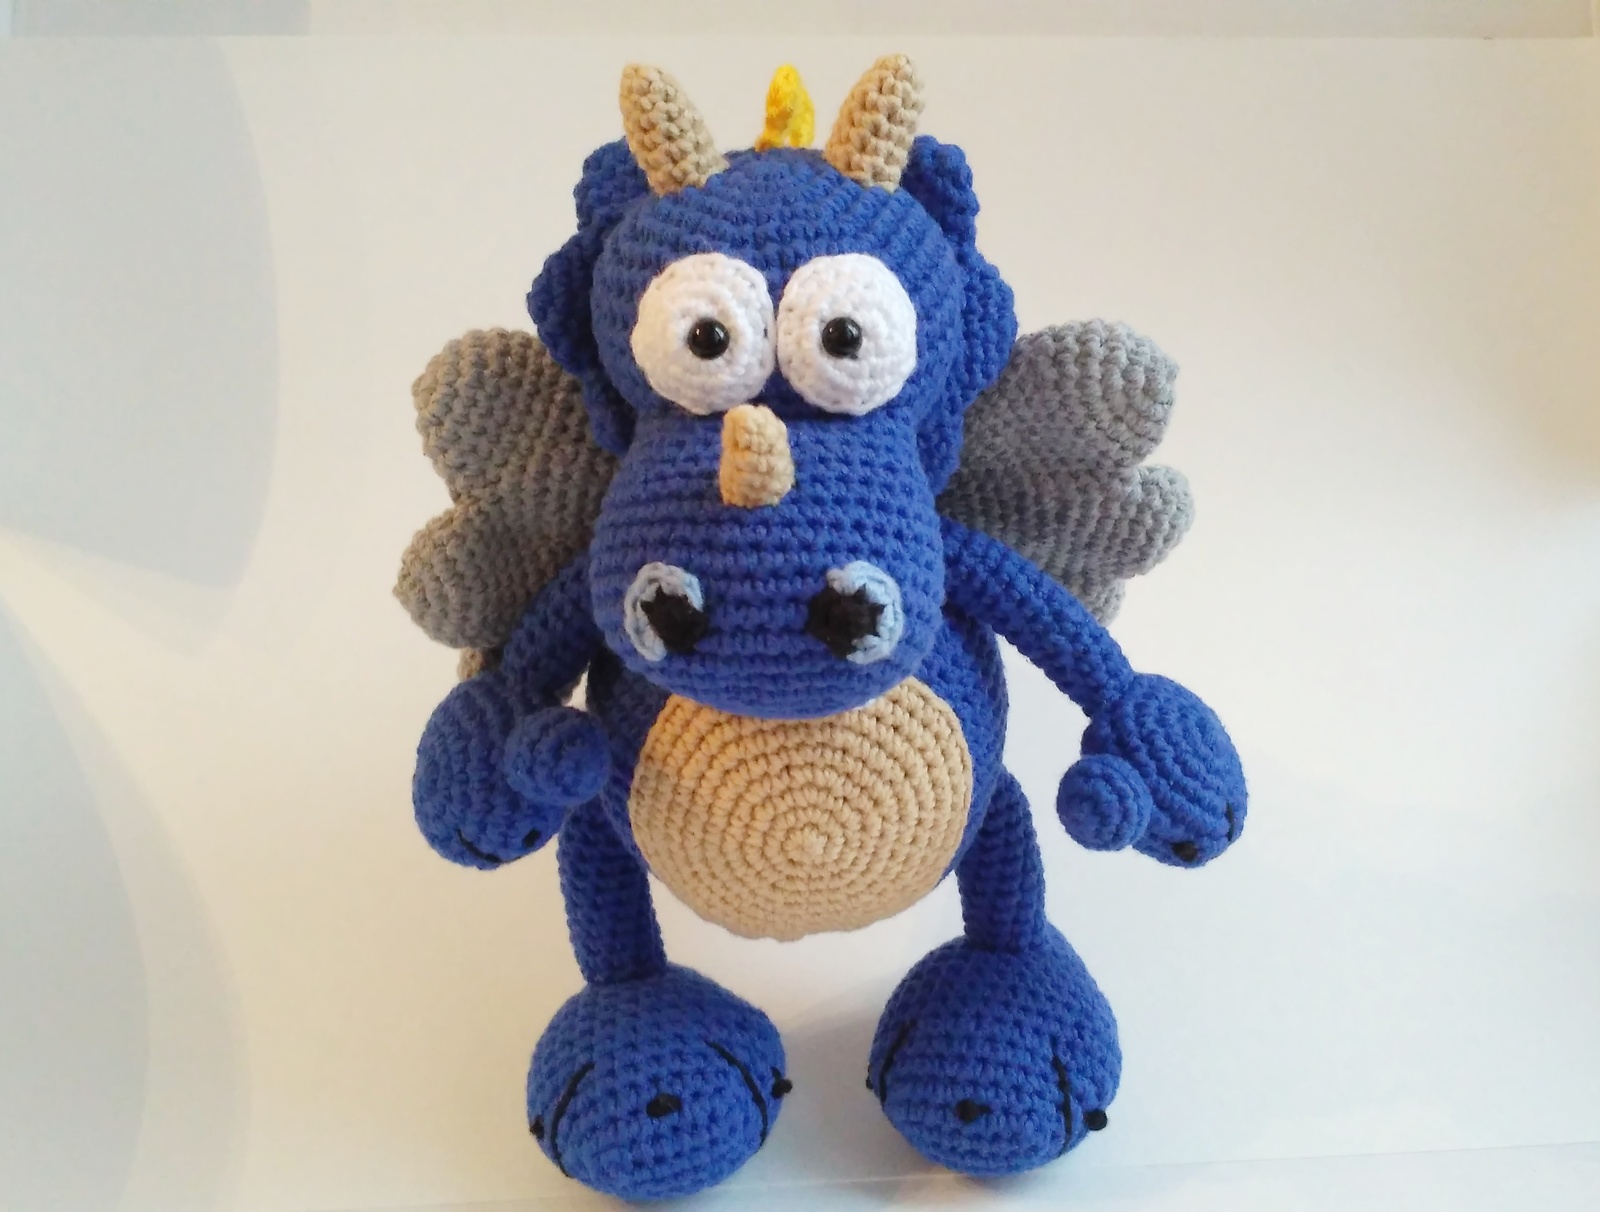 home dragon - My, Crochet, Knitted toys, The Dragon, Knitting, Needlework without process, Longpost